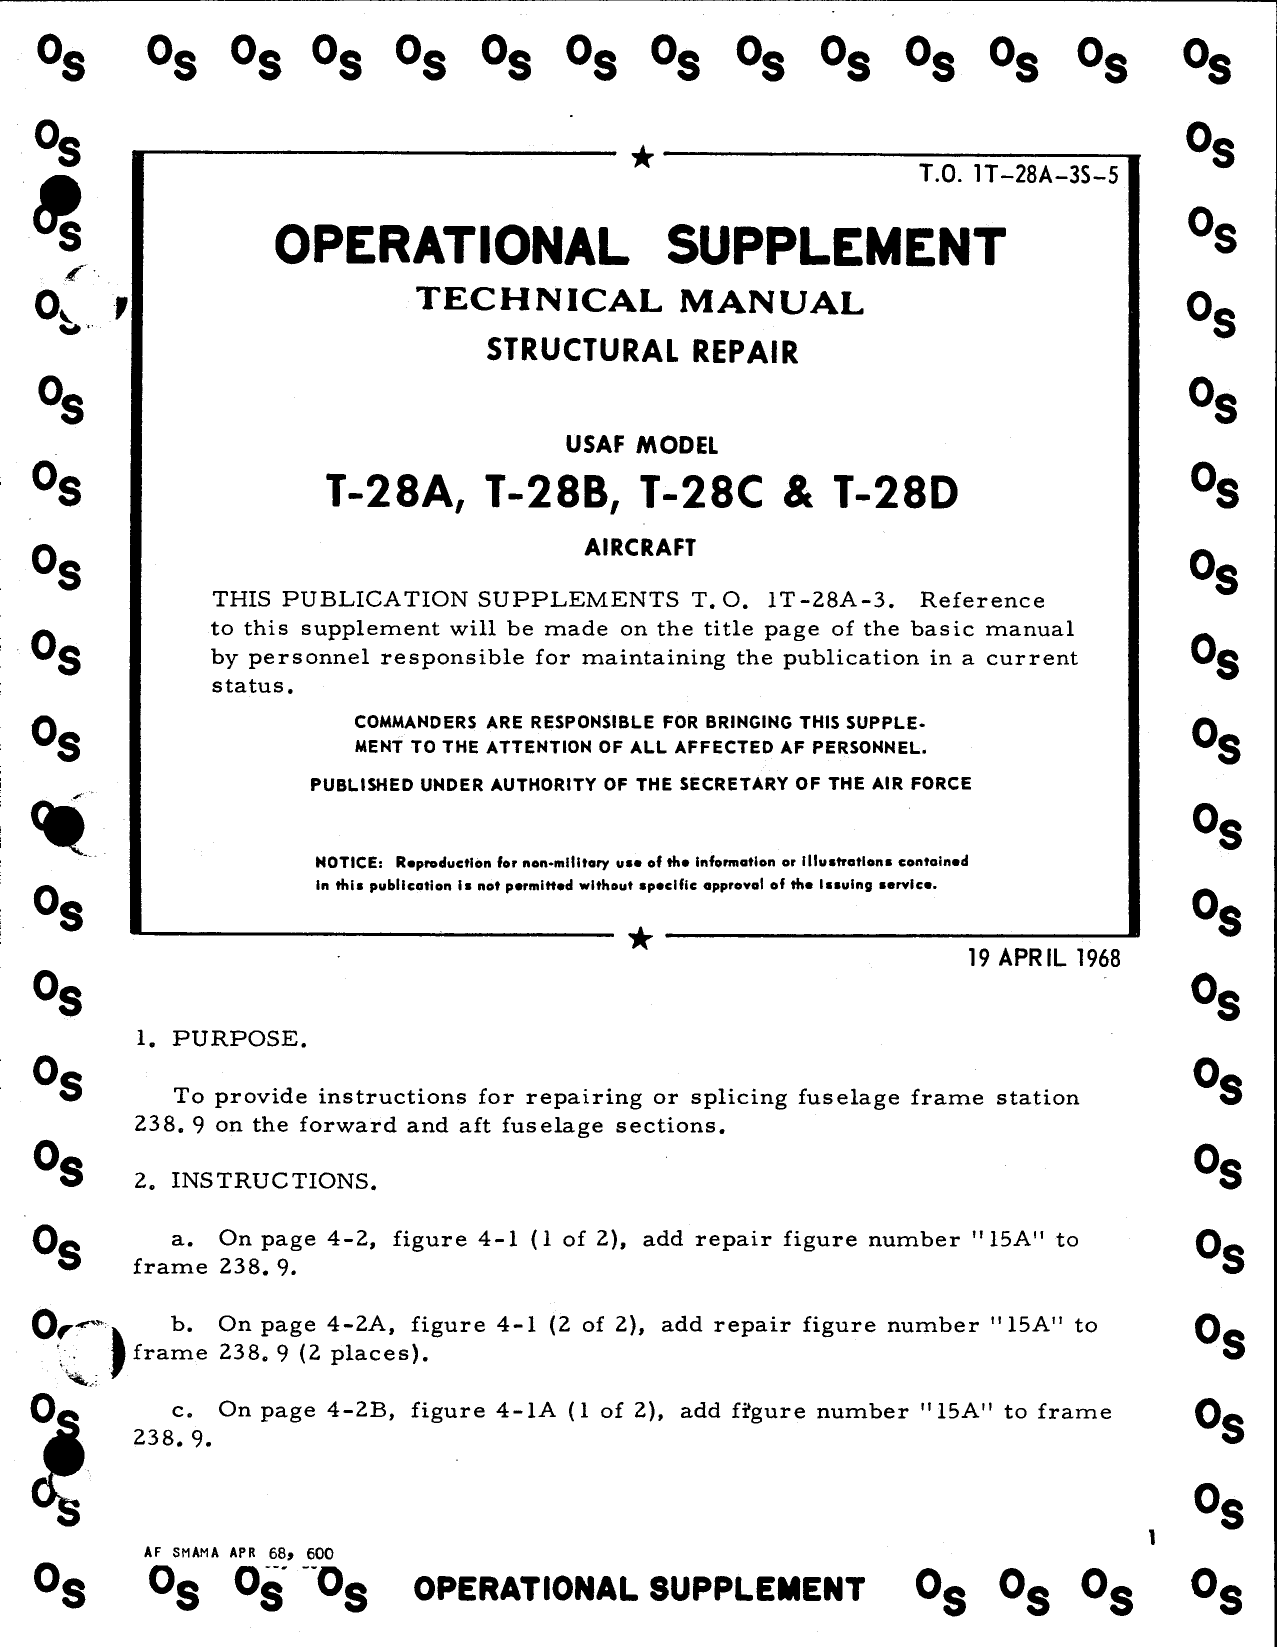 Sample page  9 from AirCorps Library document: Safety Supplement Structural Repair Tech Manual, T-28A T-28B T-28C T-28D